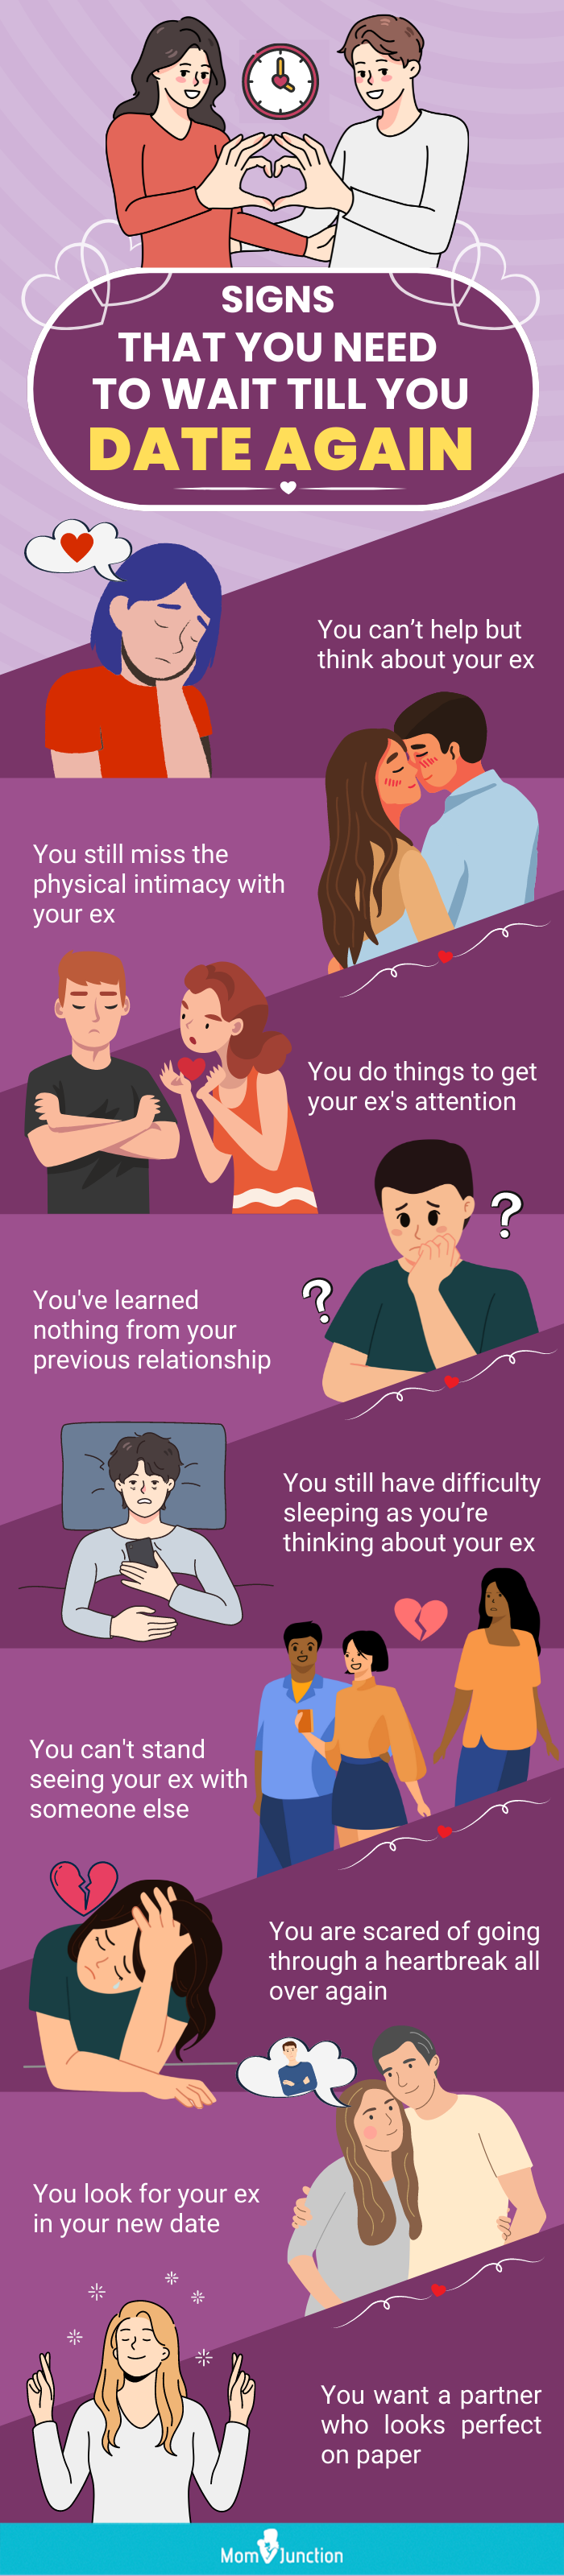 signs that you need to wait till you date again (infographic)